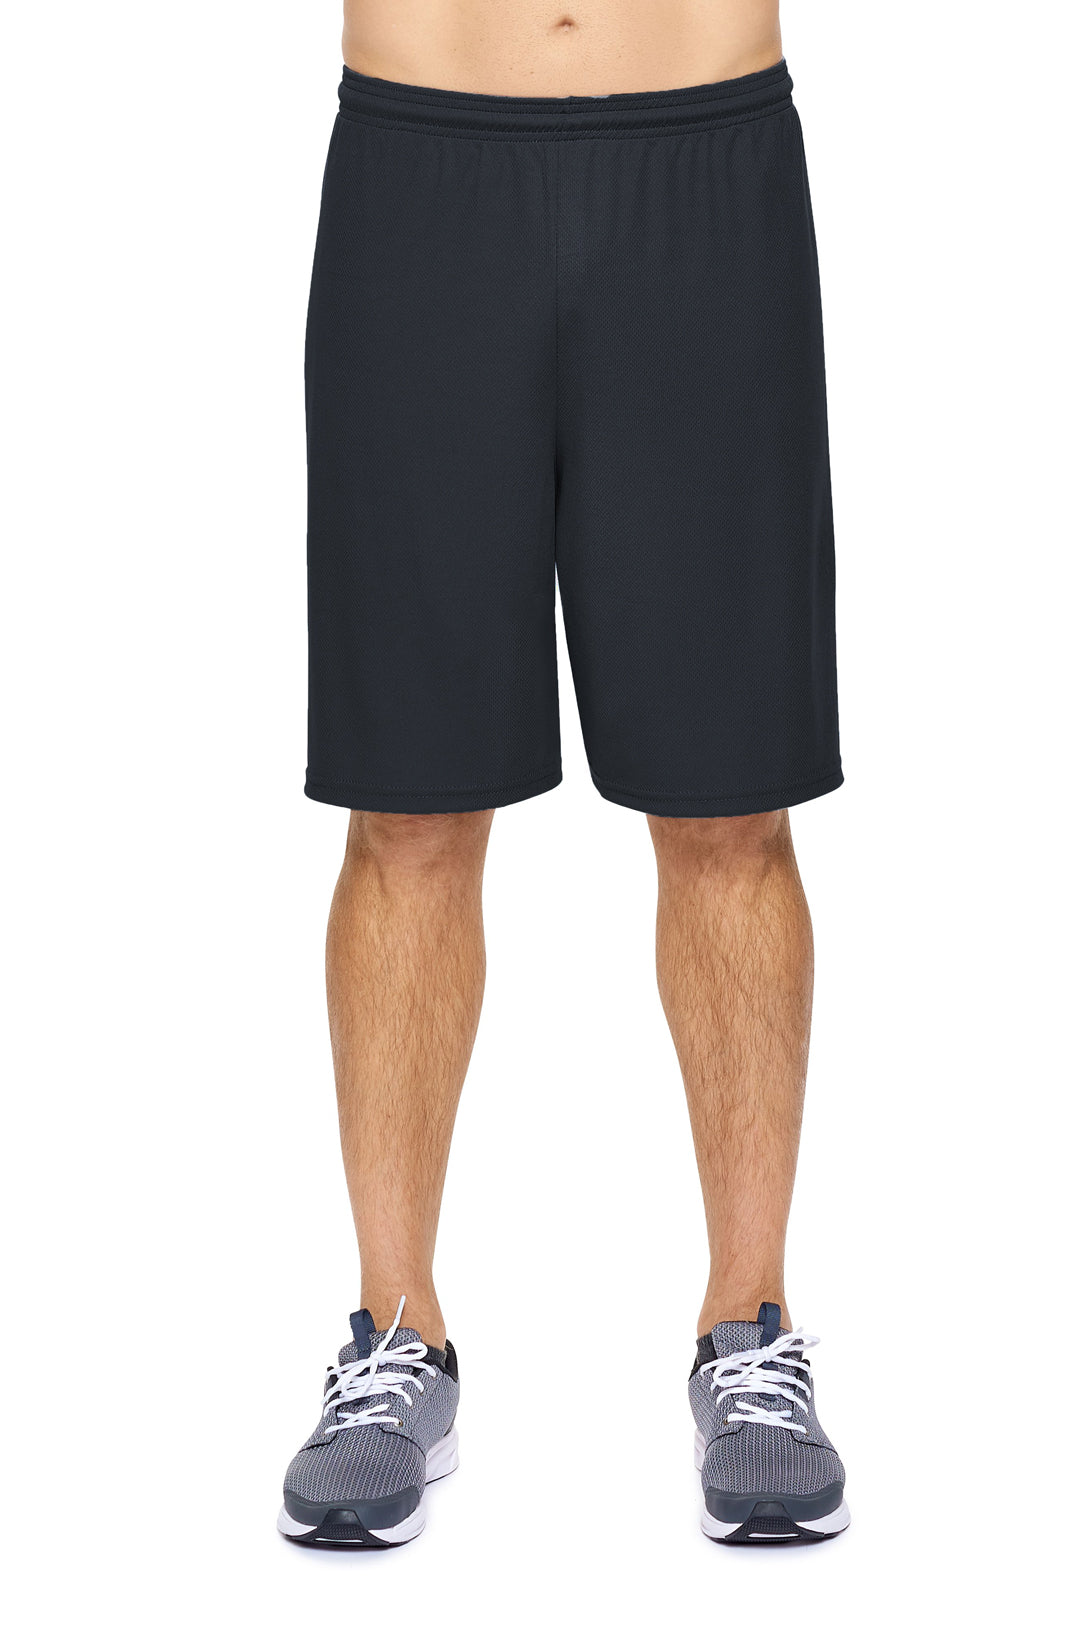 Oxymesh™ Training Shorts 🇺🇸 - Expert Brand Apparel#color_black